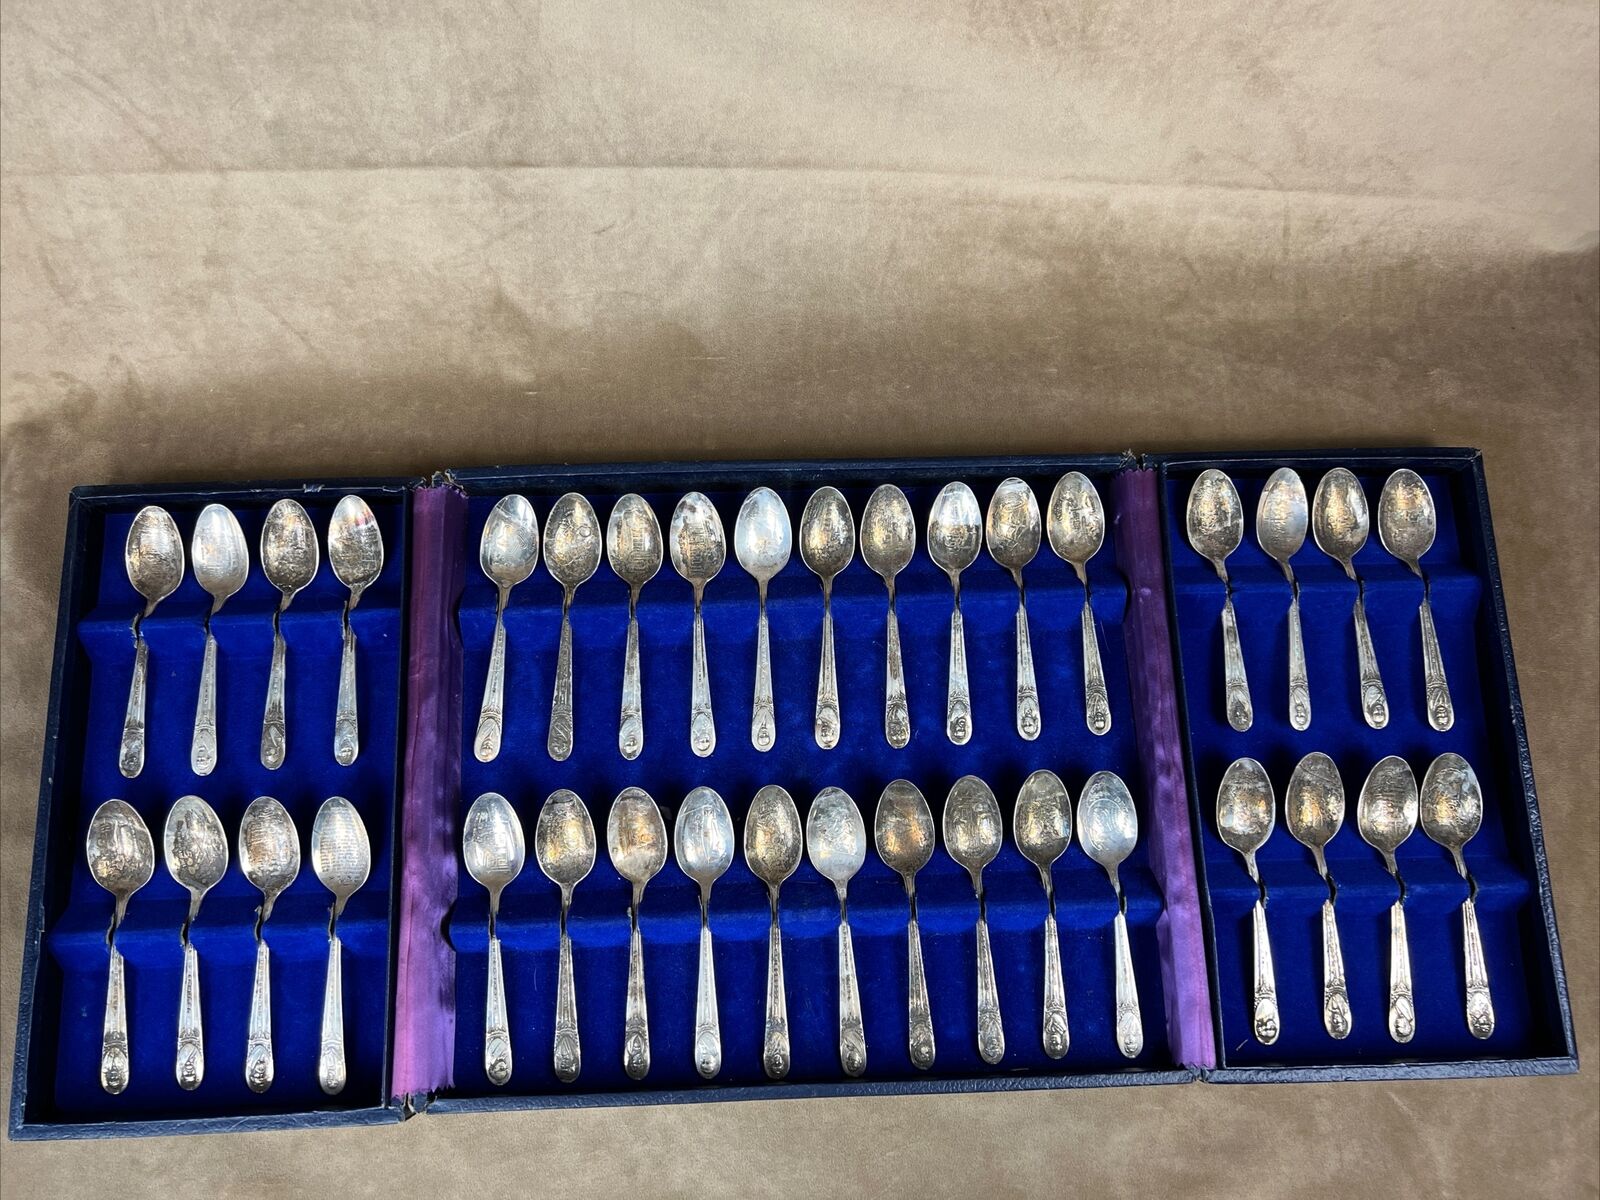 VTG Presidents Commemorative Spoon Collection Wm. Rogers 36pc Silverplate Boxed